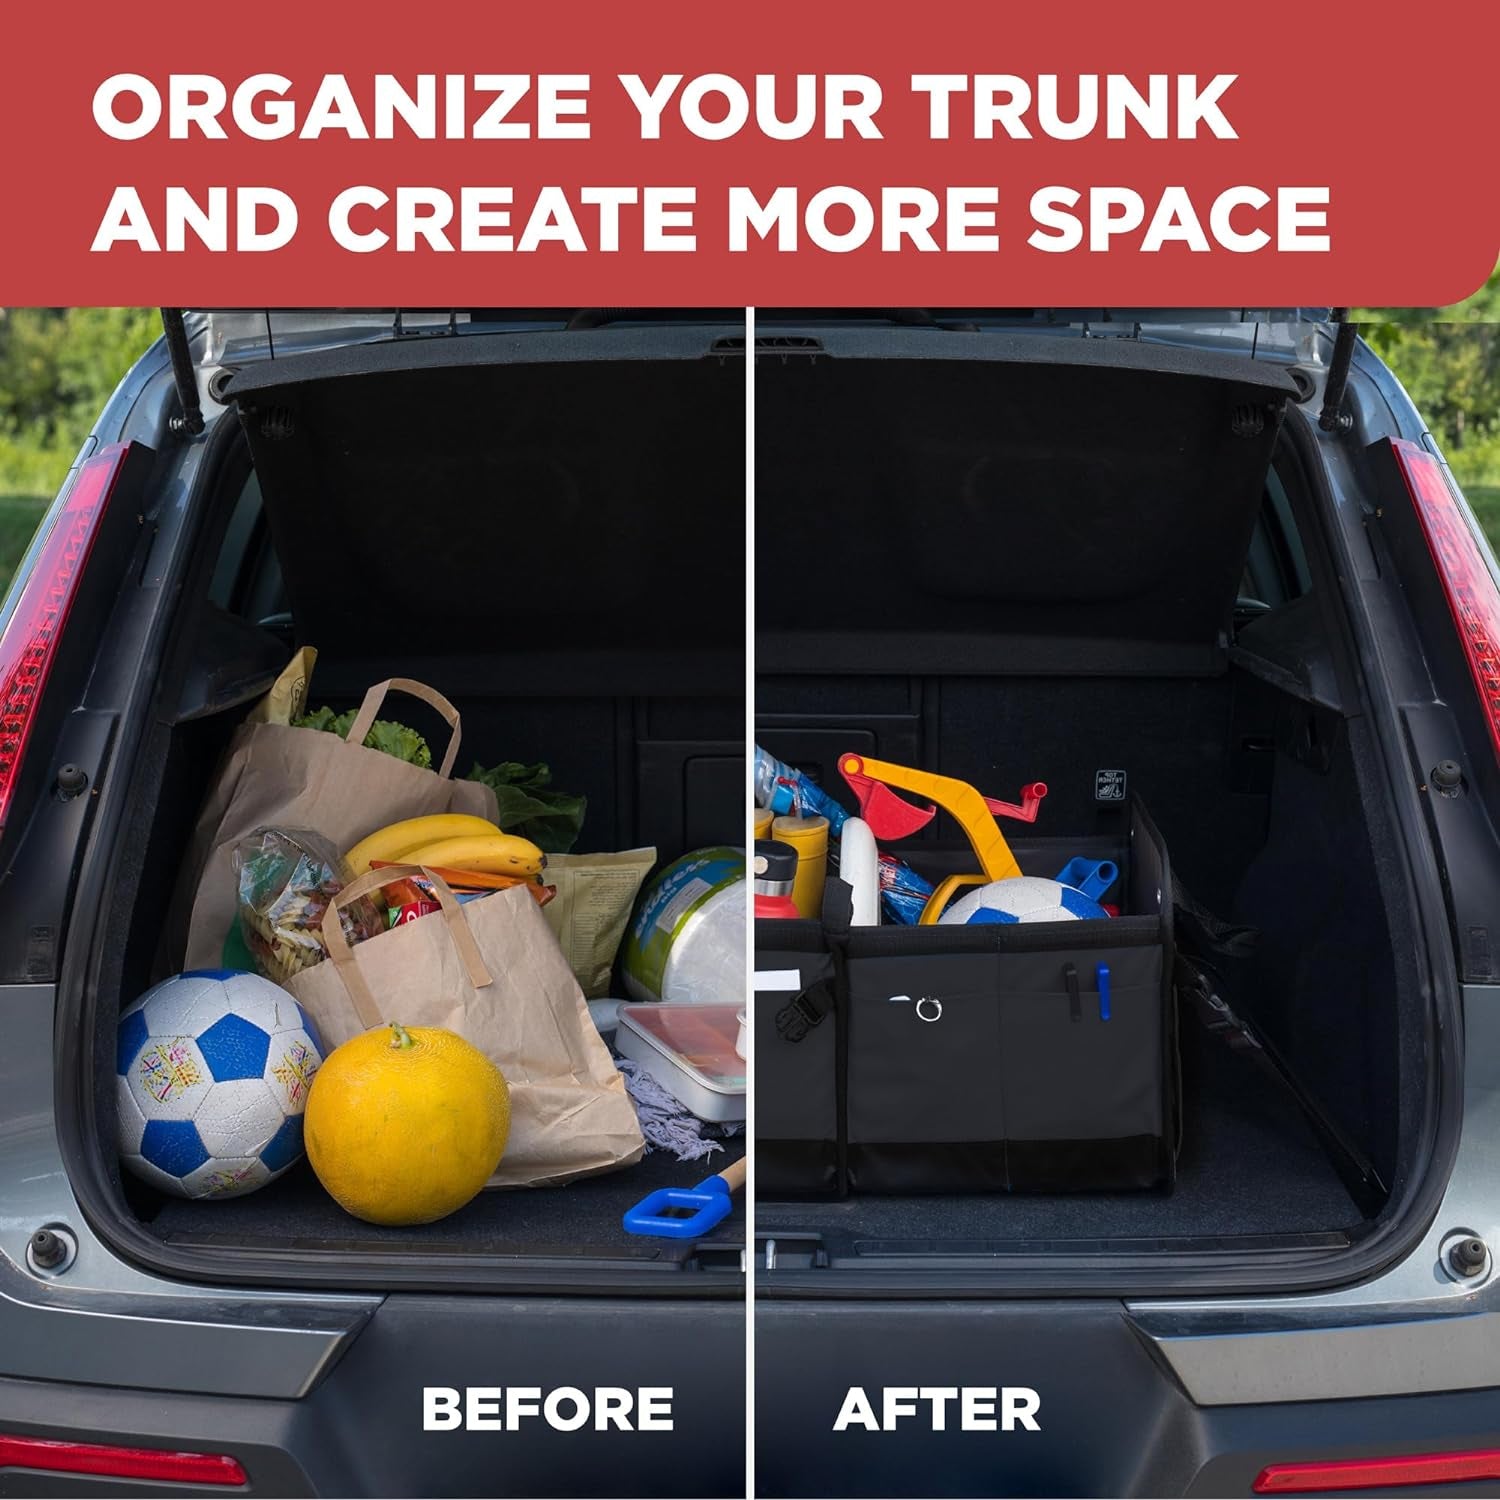 "Premium Car Trunk Organizer - Stylish and Resilient Construction, Customizable Compartments, Ideal Present for Auto Enthusiasts, Portable and Collapsible, Optimal for SUVs and Cars (Large, Black)"